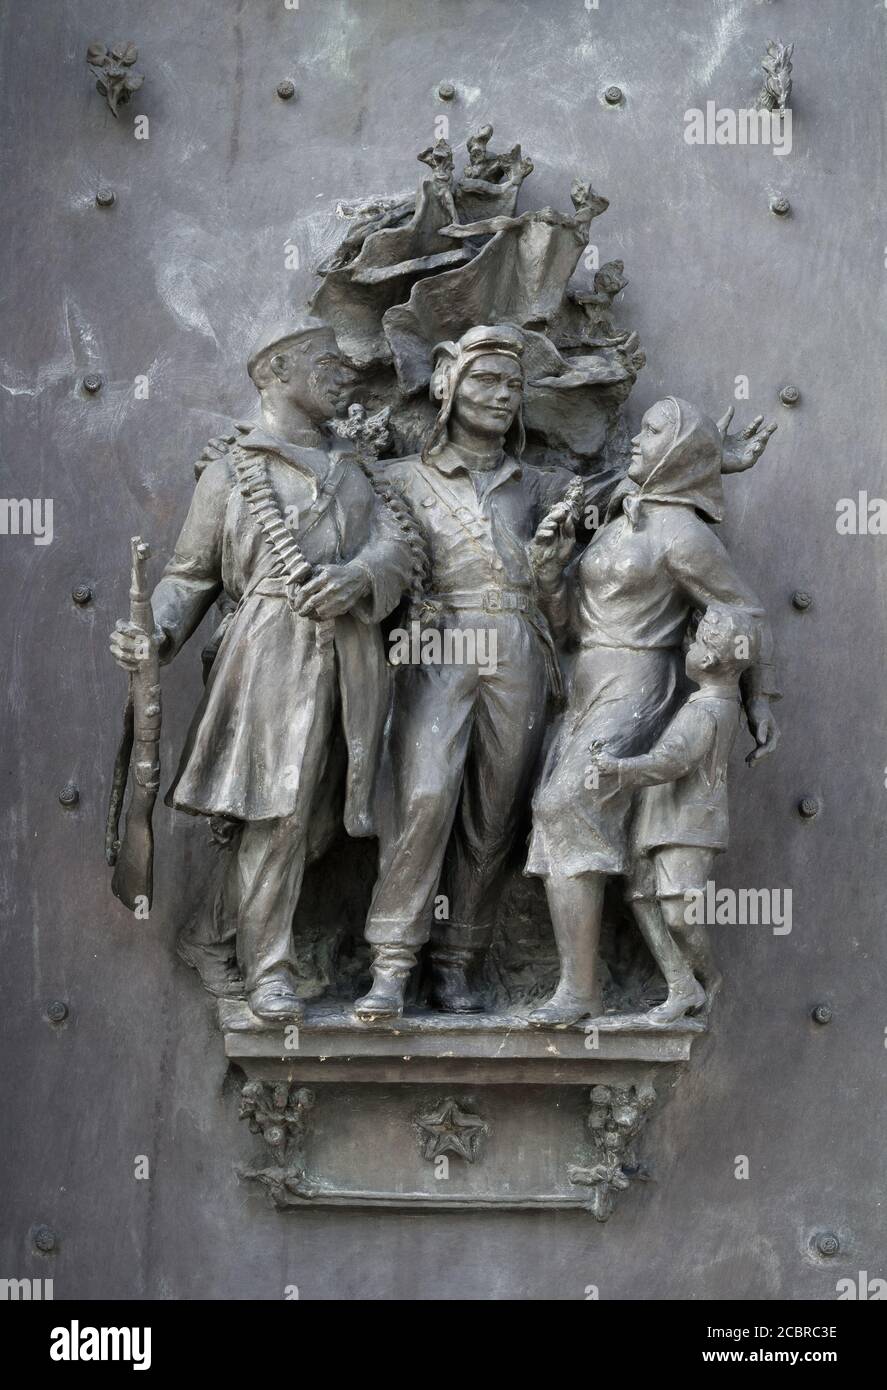 Soldiers as liberators and civilian family are celebrating liberation and victory in war and warfare. Statue made in style of socialist realism. Stock Photo